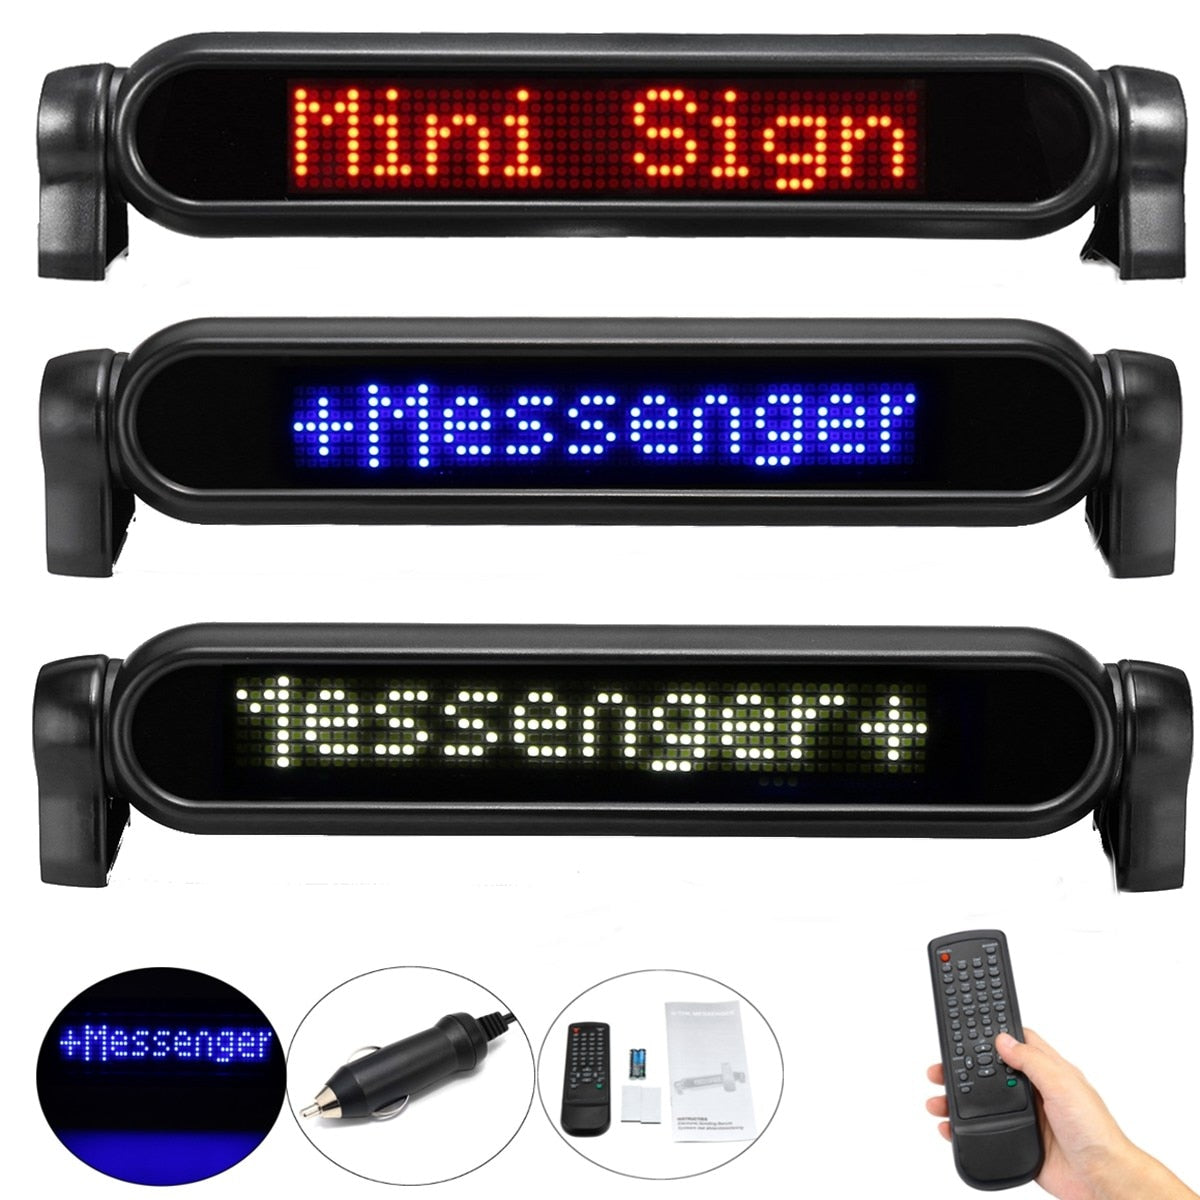 Programmable LED Sign for Cars, Trucks and SUV'S